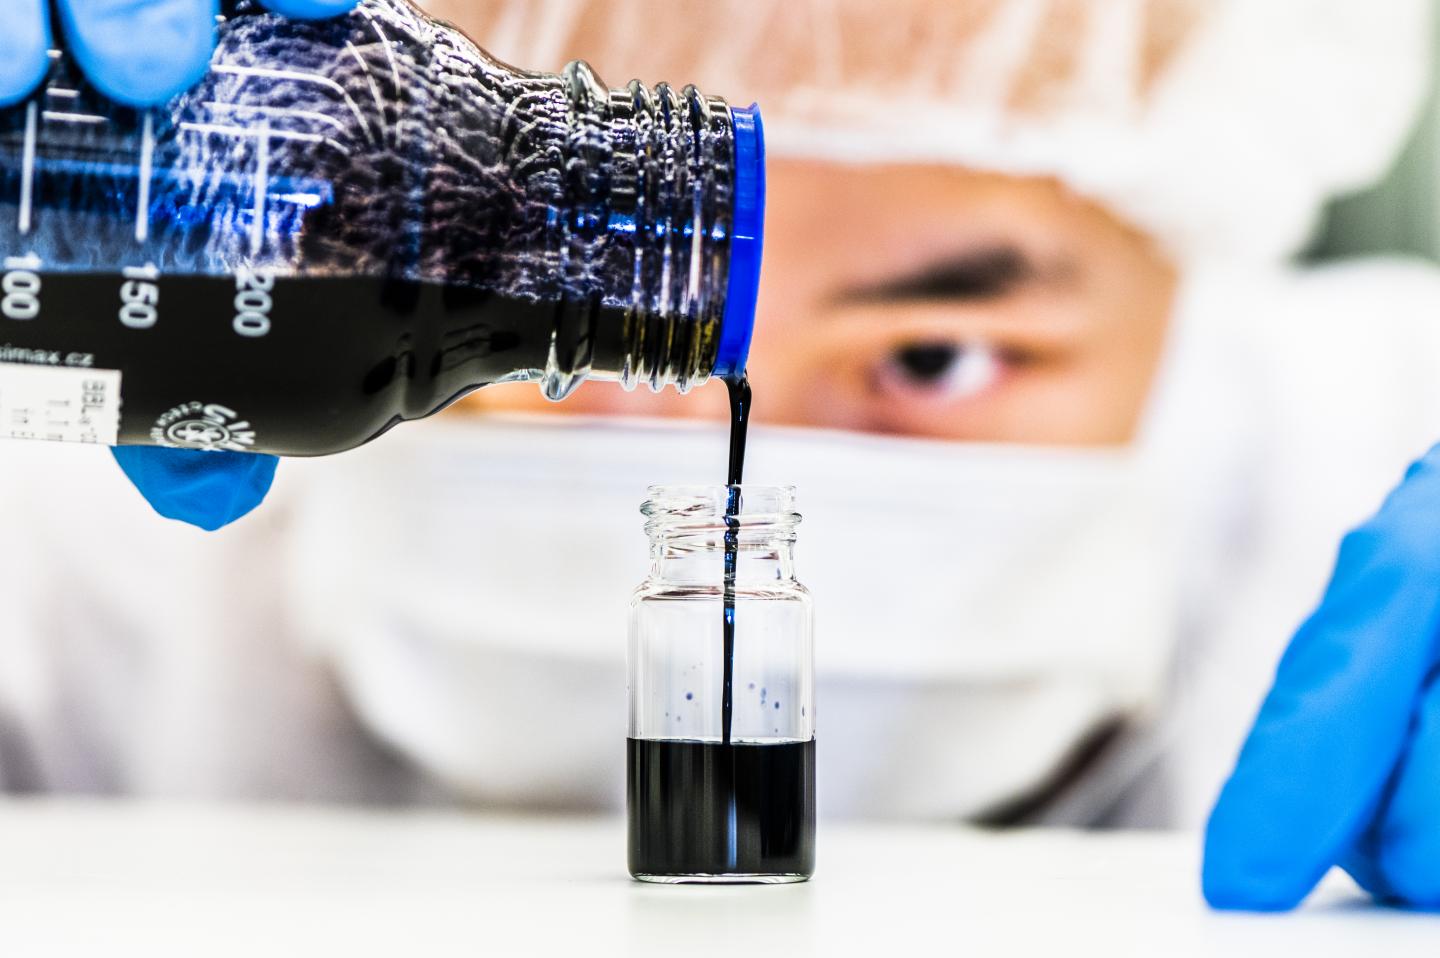 Conductive polymer ink